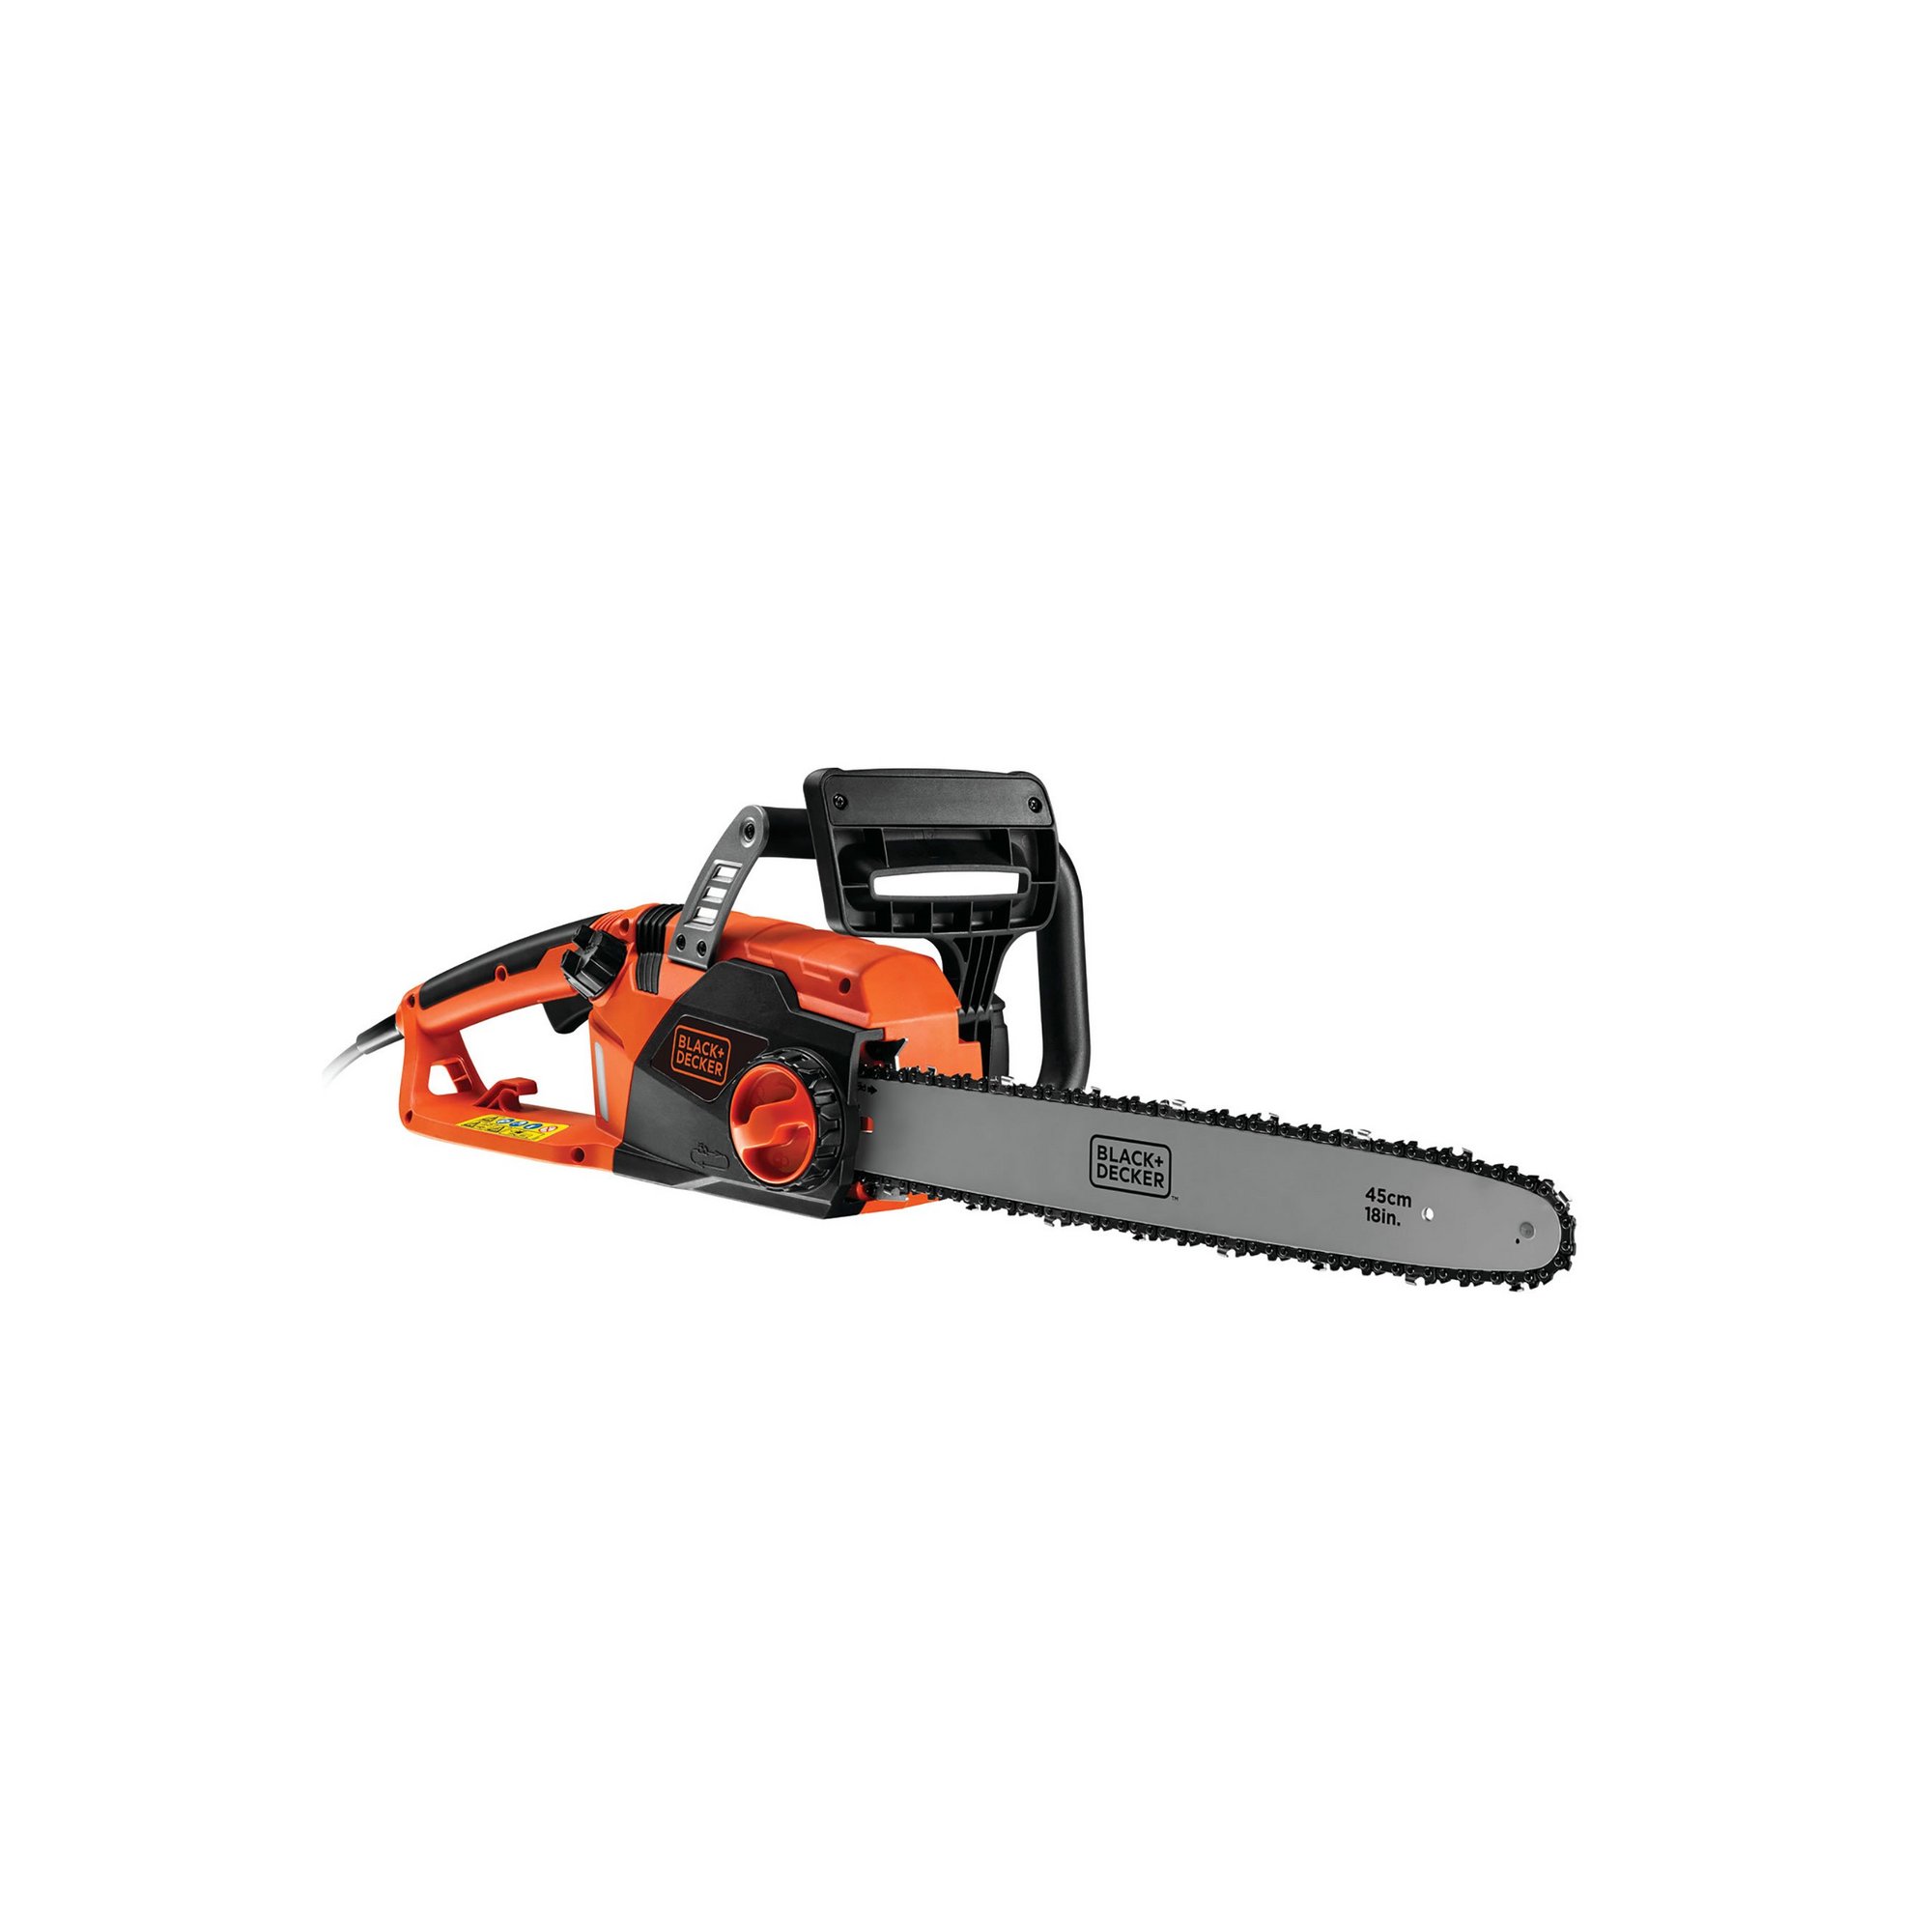 Black & Decker 2200w Corded Chainsaw with 45cm Cutting Capacity